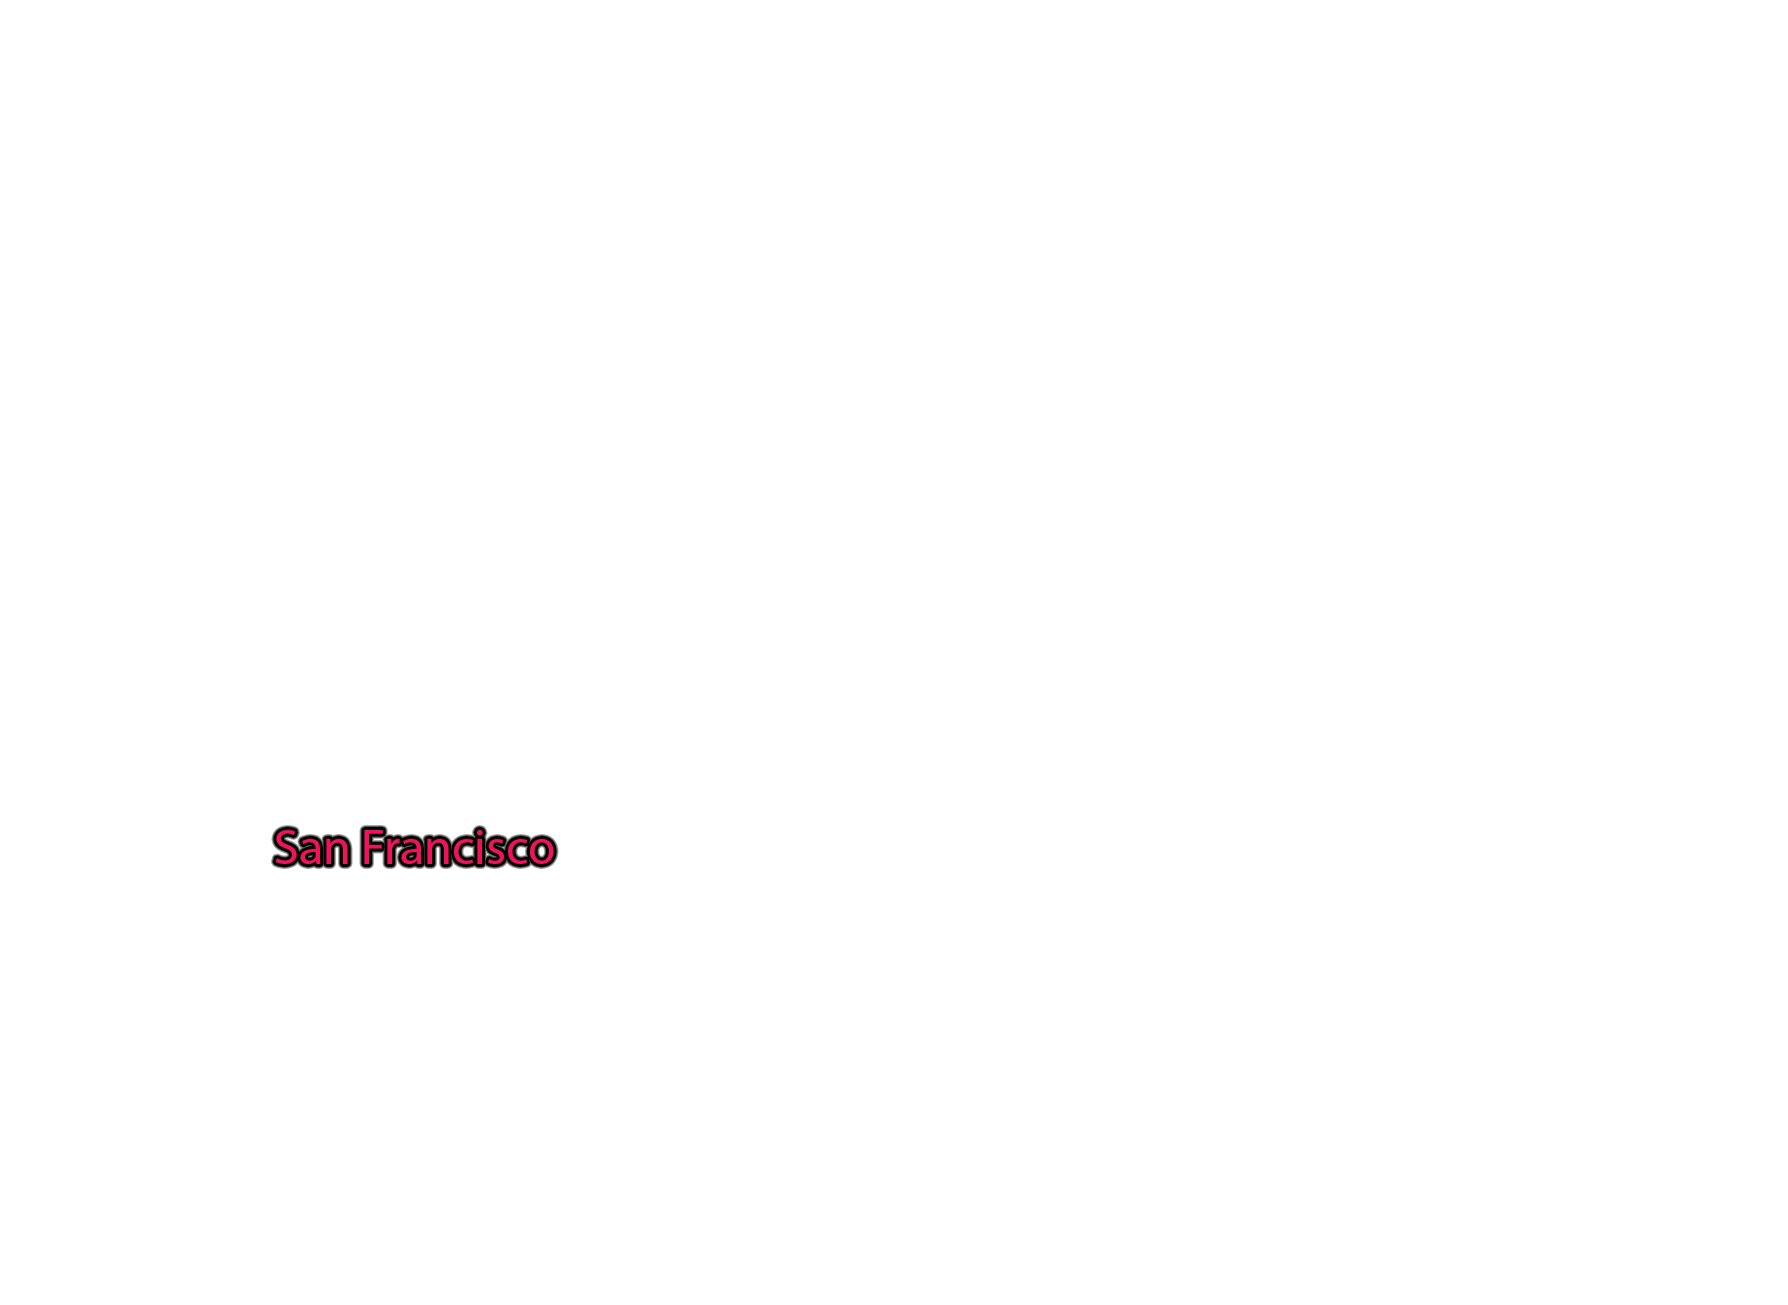 San-Francisco label with glow